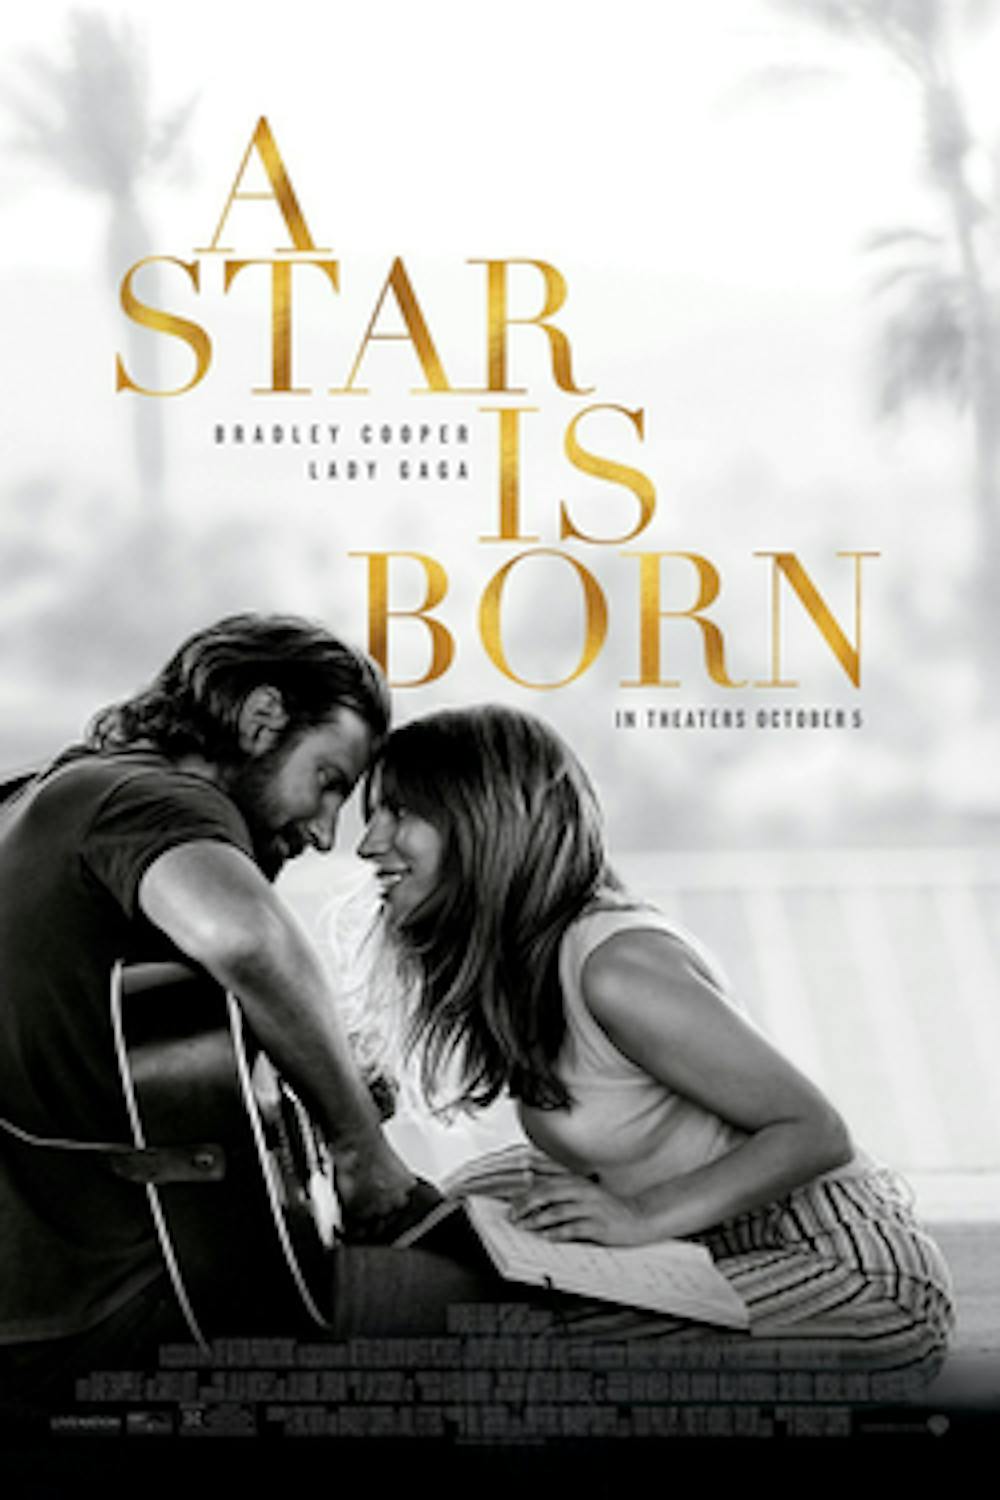 <p>The latest vision of "A Star is Born" displays a powerful dynamic between Lady Gaga and director Bradley Cooper.</p>